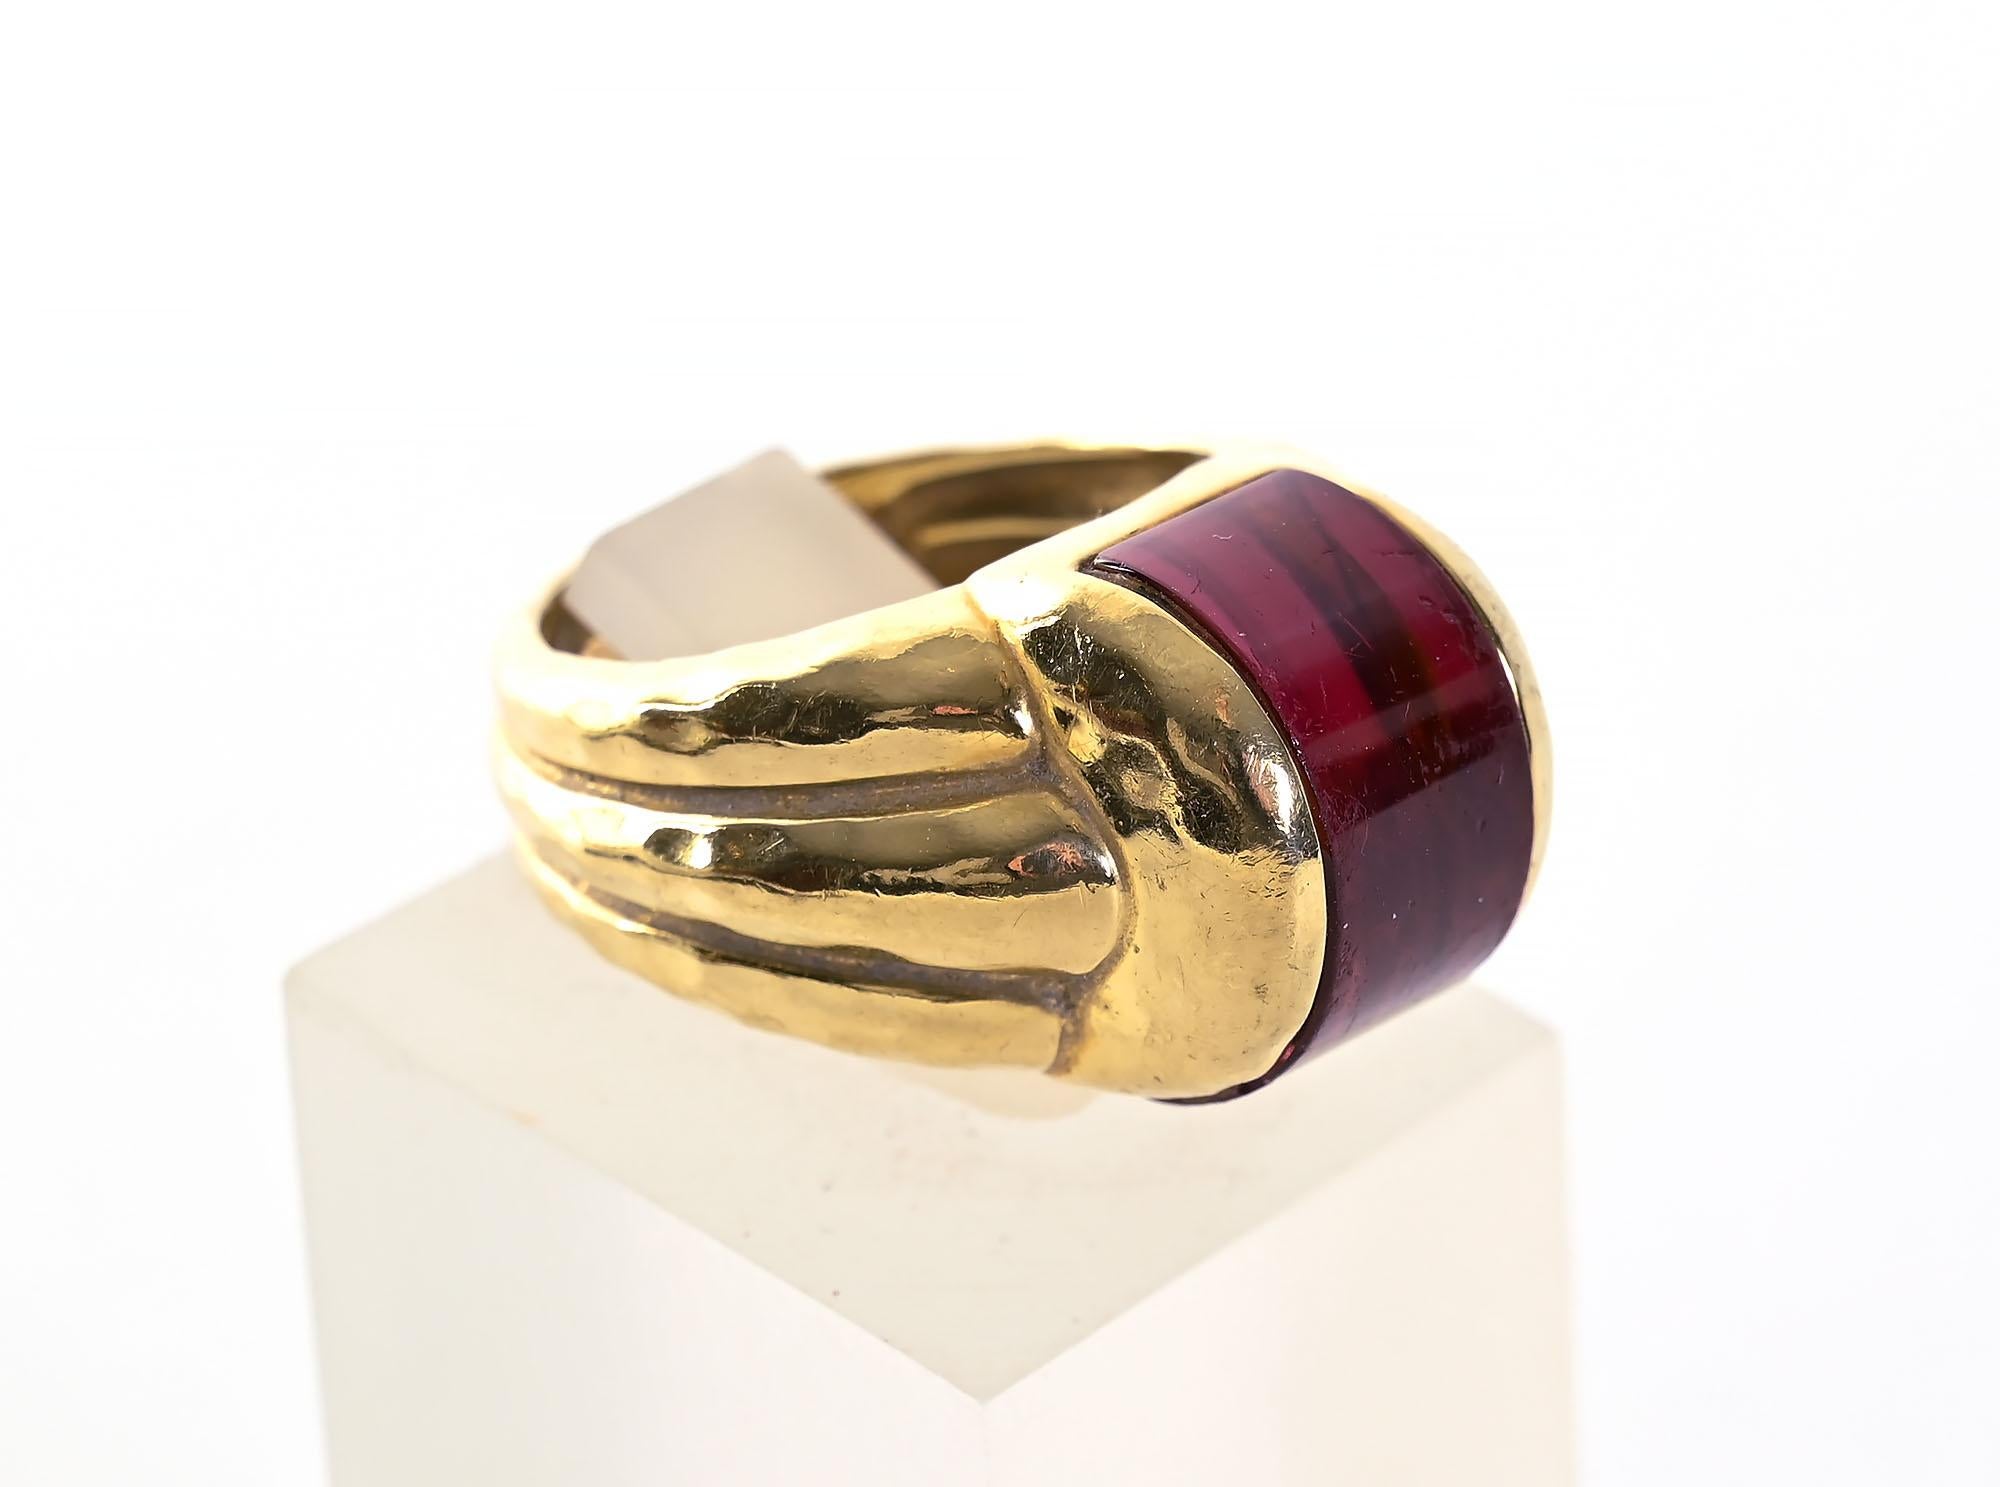 Sporty tourmaline ring set in 18 karat gold by American designer, Henry Dunay. The half round cabochon stone is set in Dunay's often used hammered gold with triple banding throughout the ring.
In addition to Dunay's signature is the style number